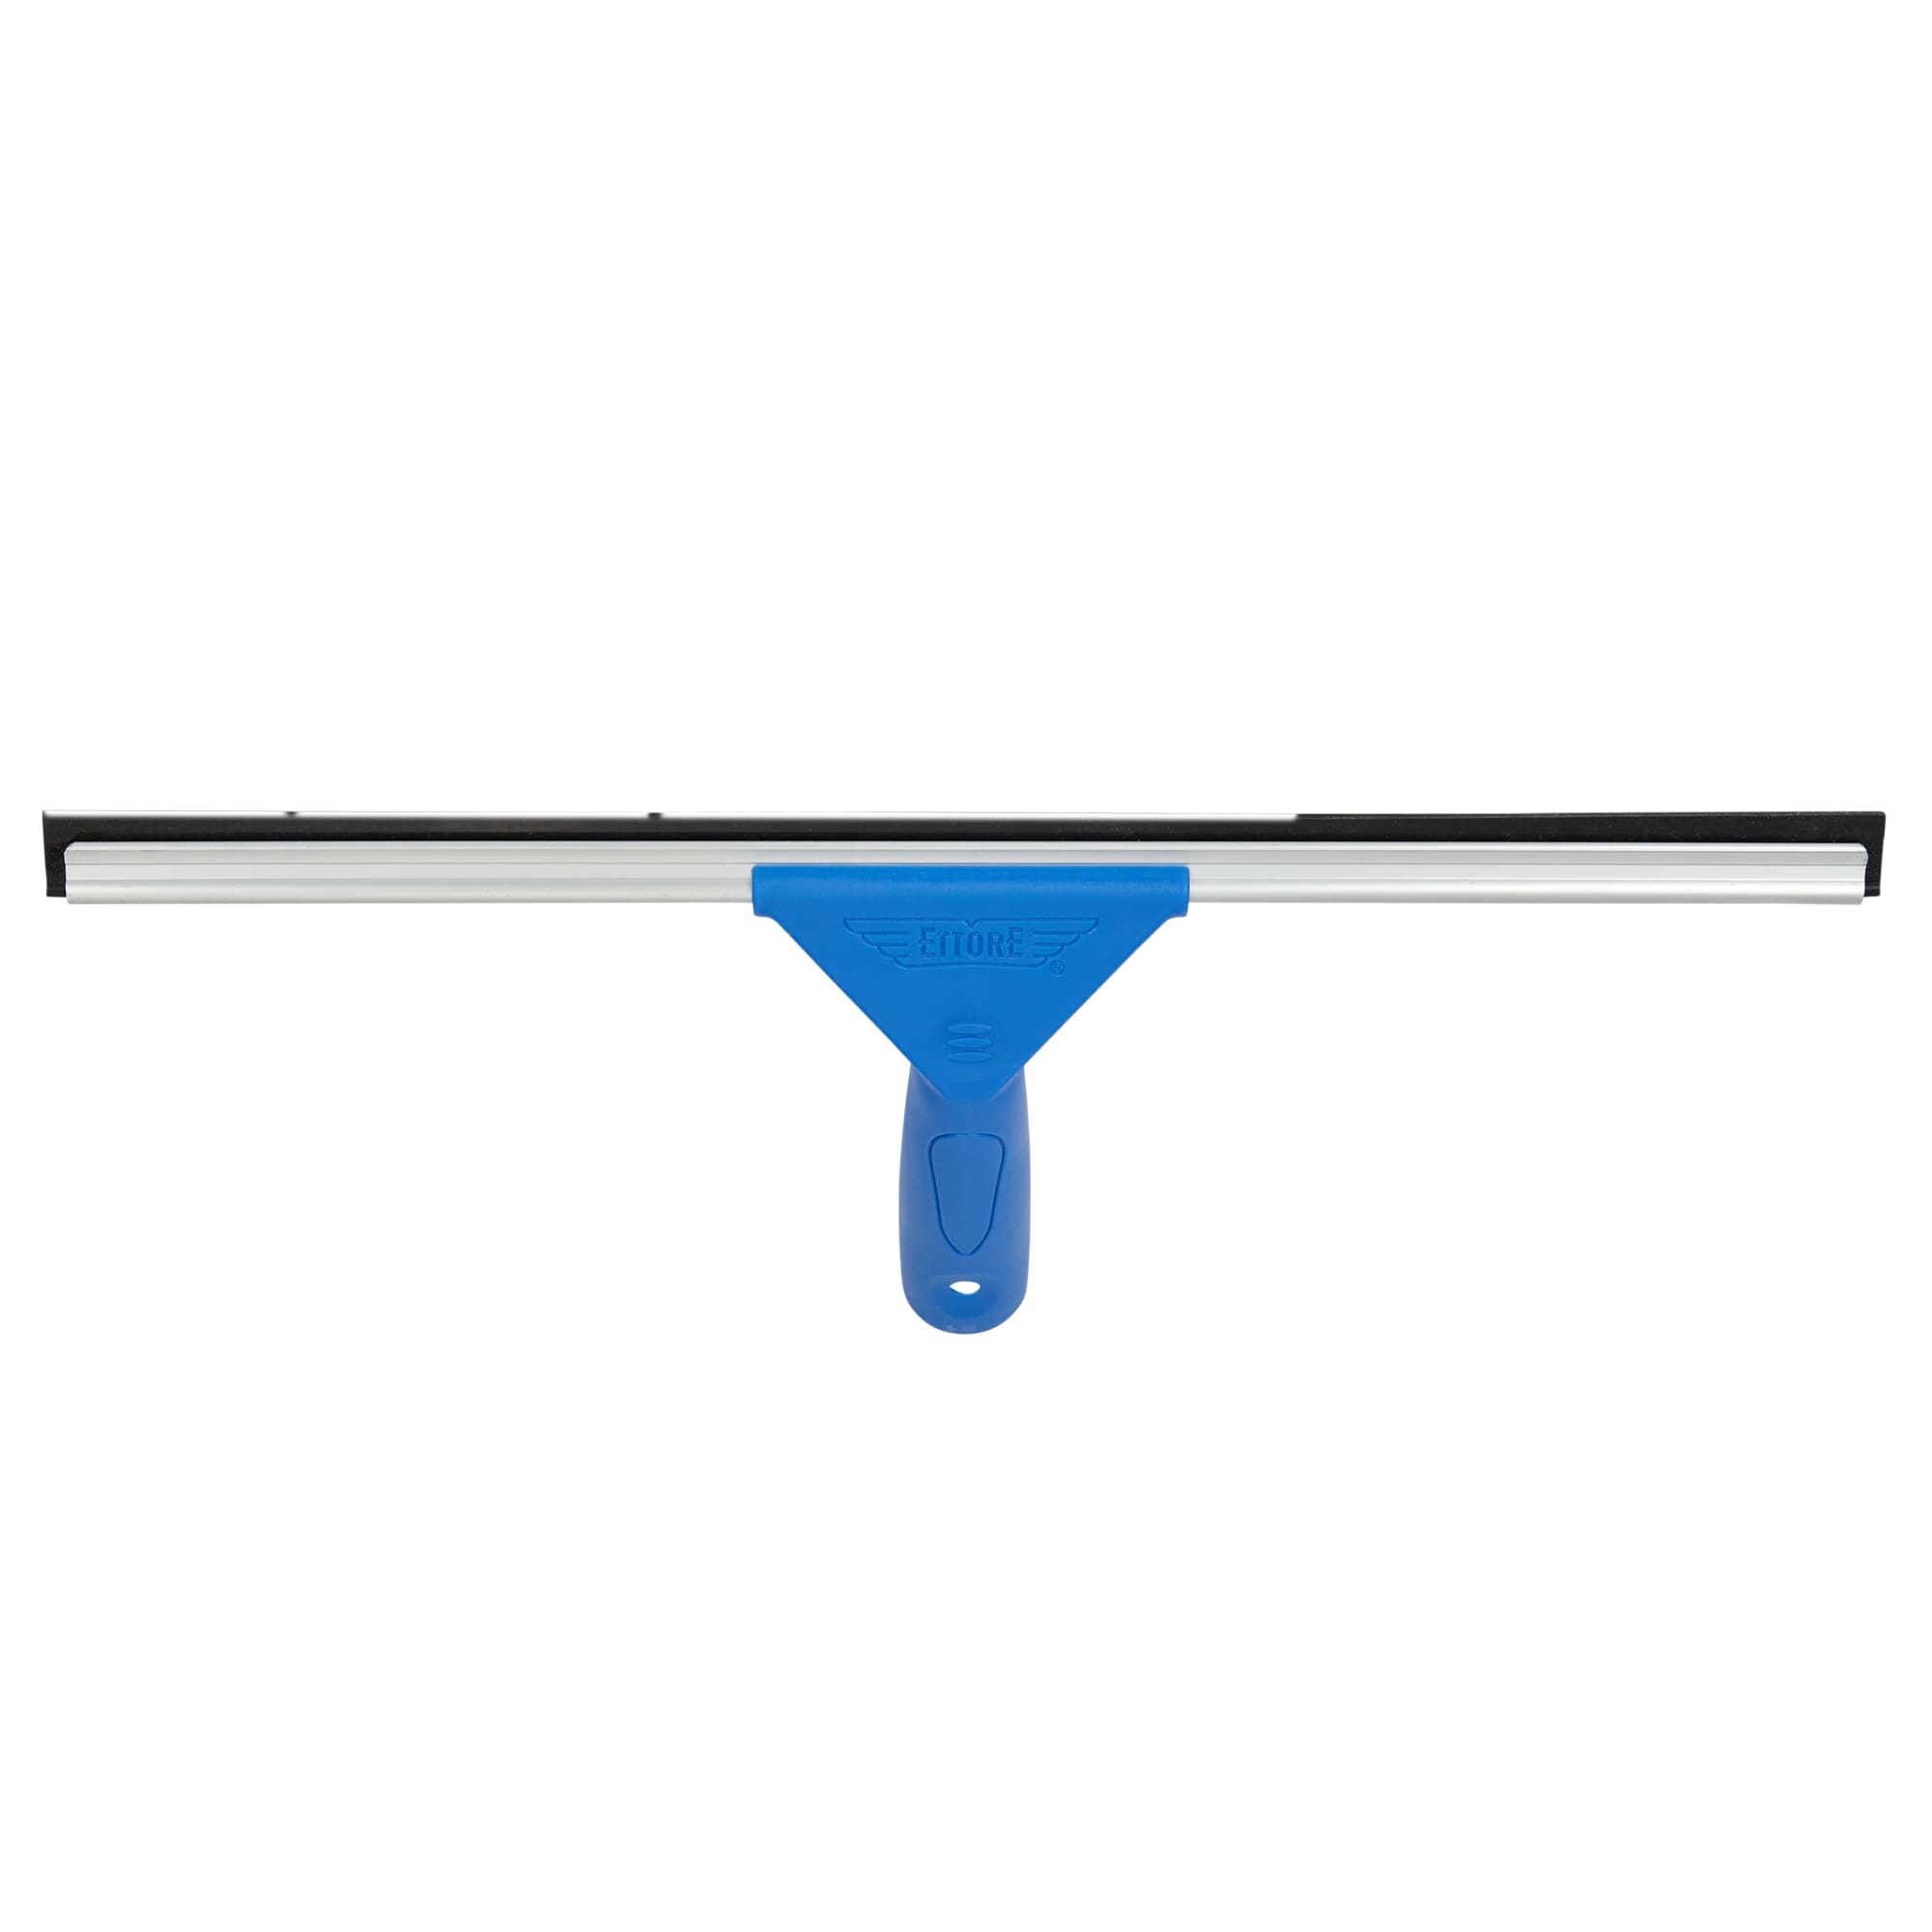 All-Purpose Squeegee – Ettore Products Co